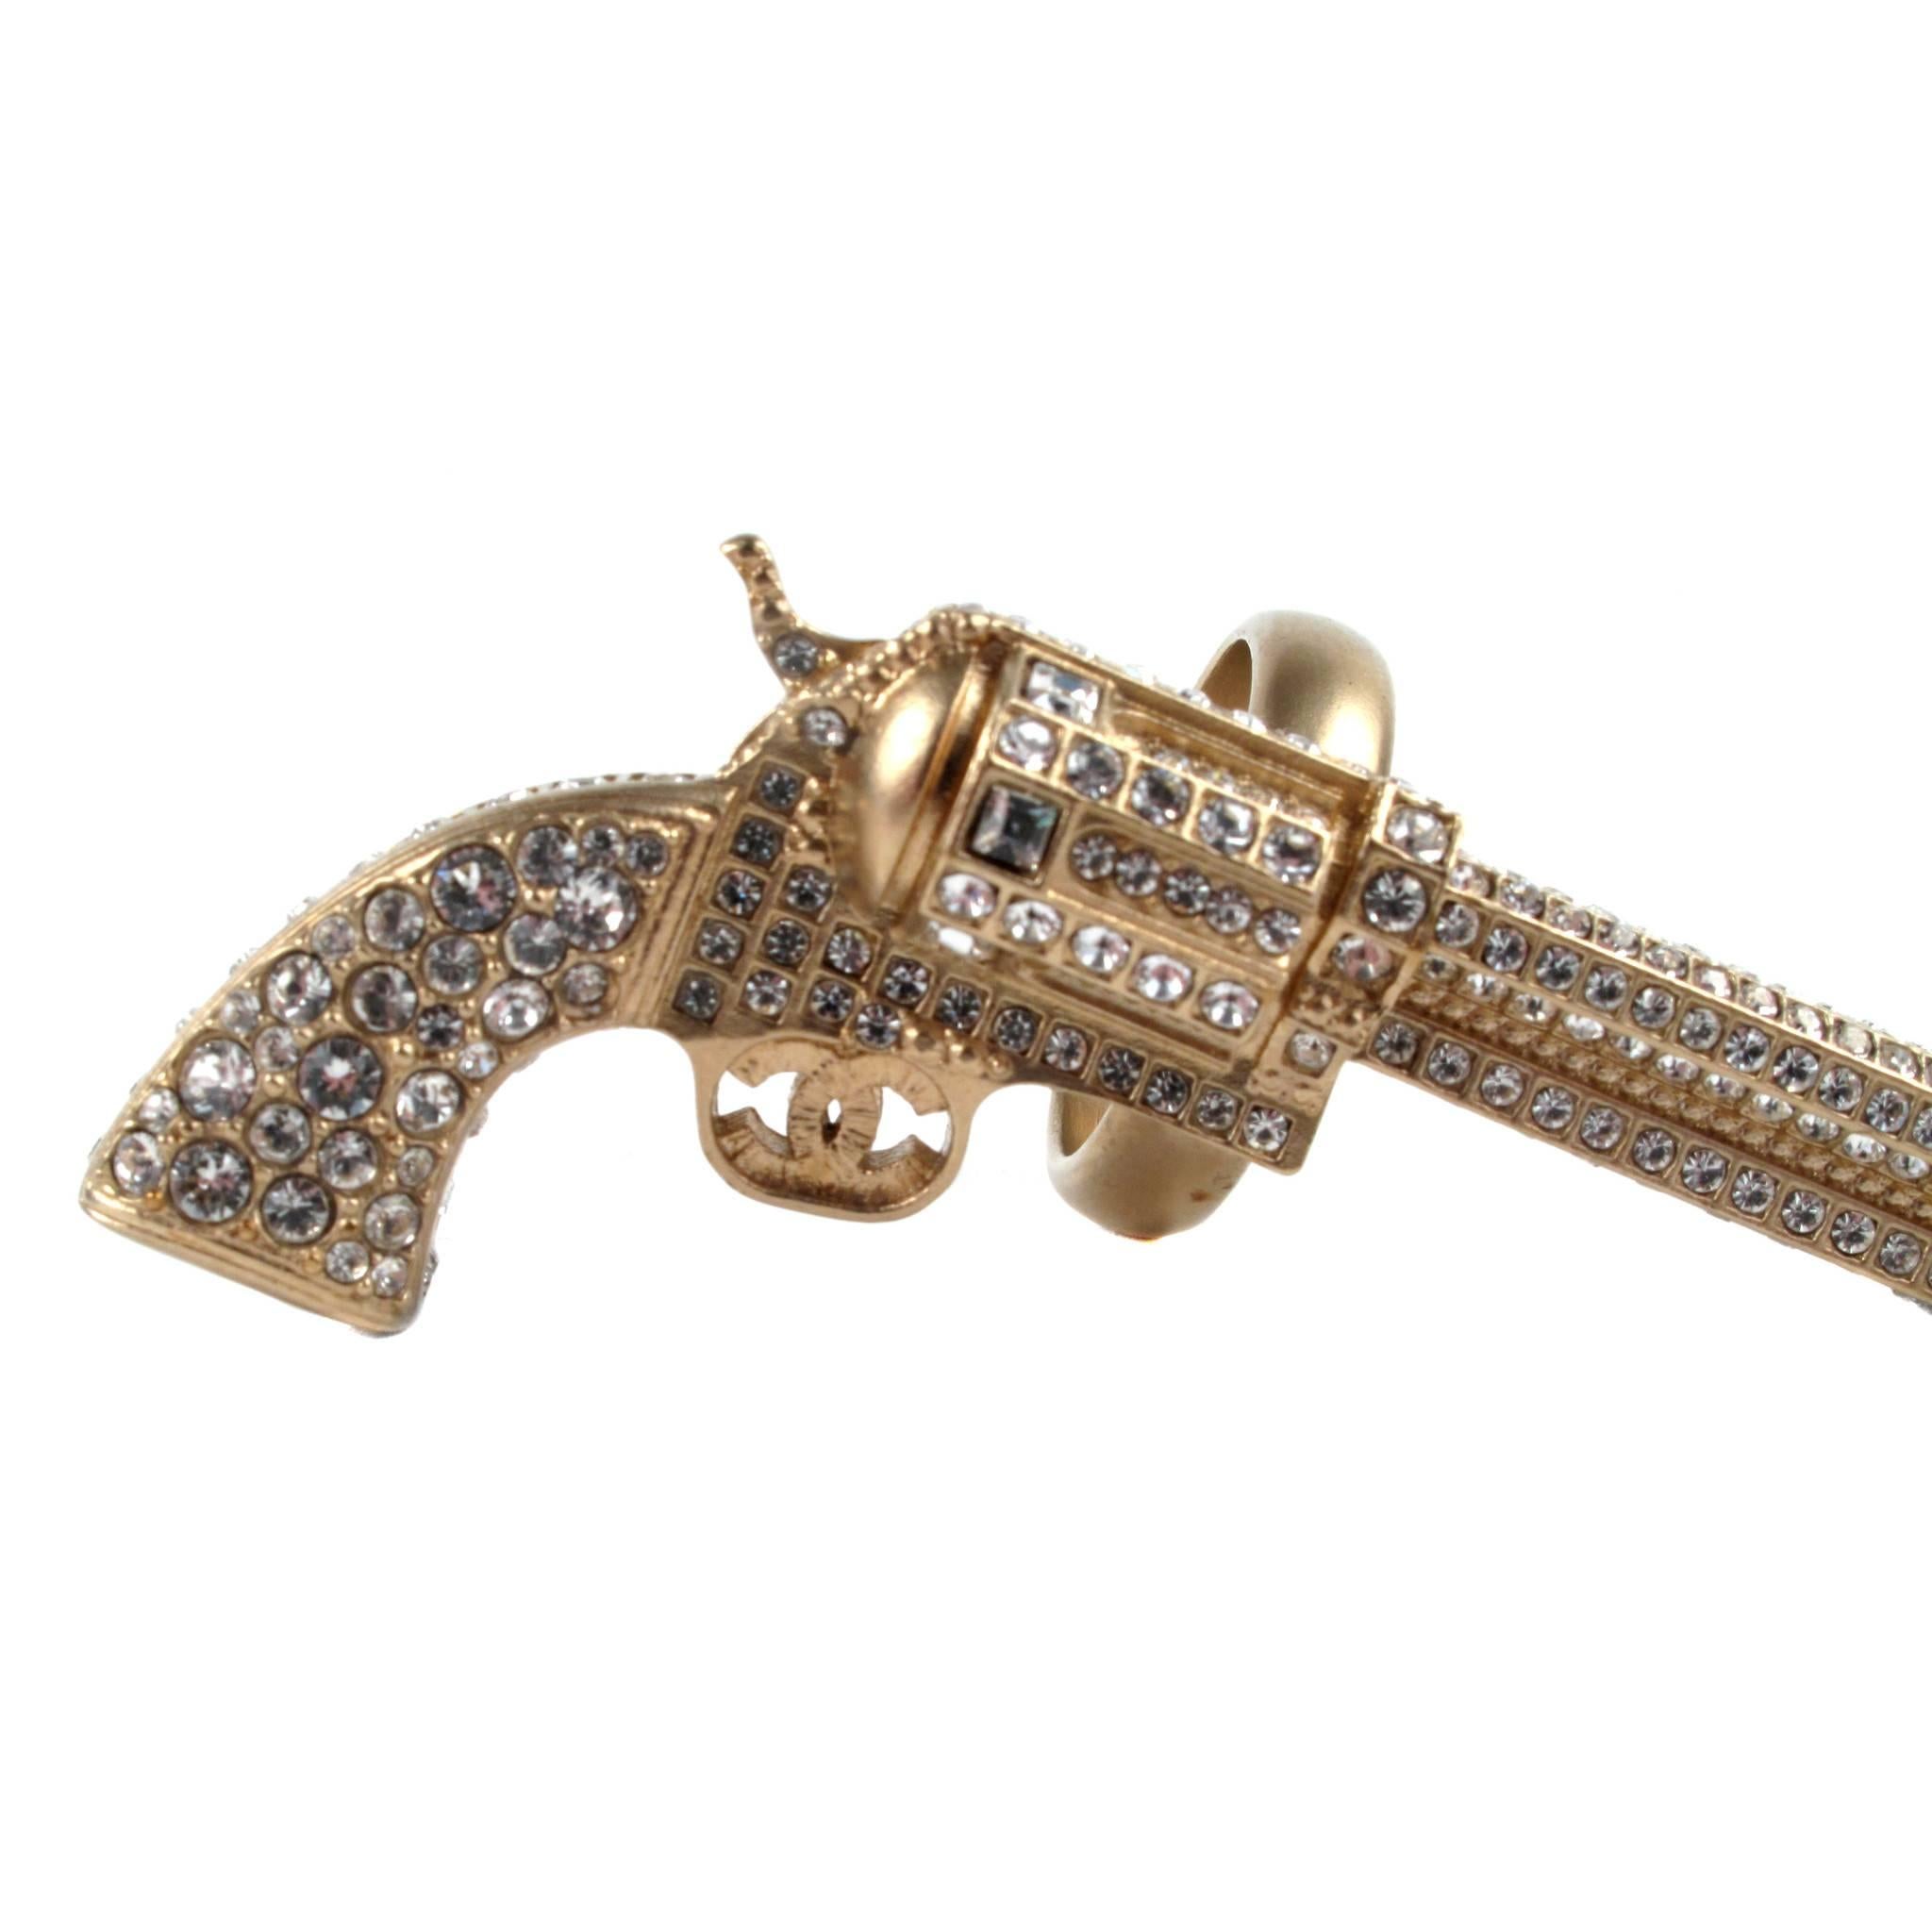 Make an unforgettable statement with this New Chanel Gold Tone Pistol Ring.  Edgy?  Highly collectible?  Mais oui!  Introduced as part of the Fall 2014 Collection, ring features gold tone metal and clear Strass crystals.  Double 